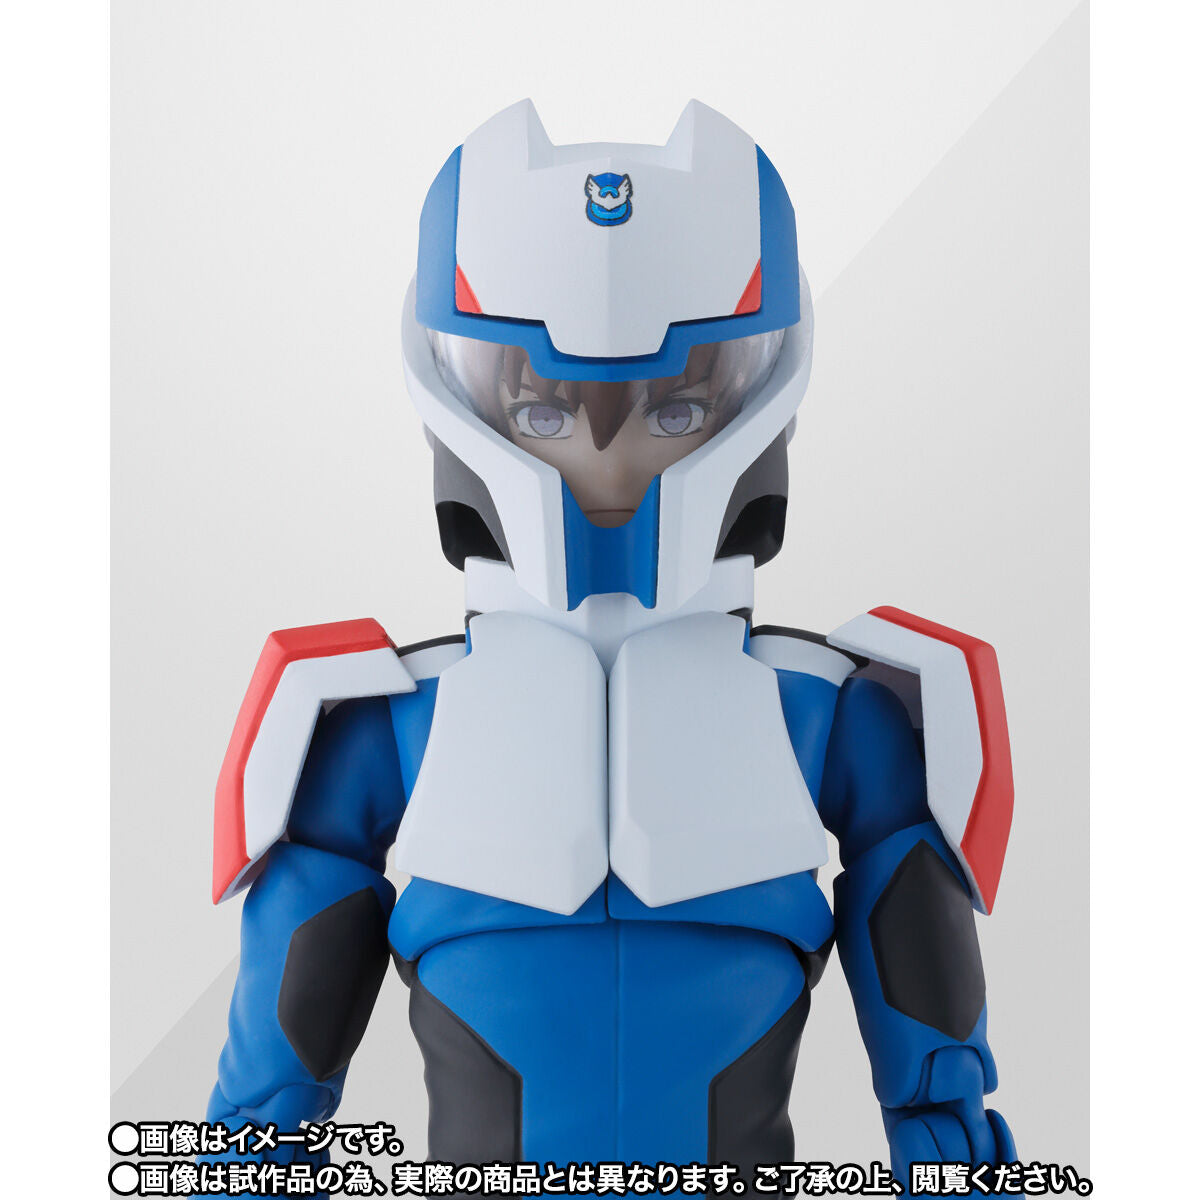 SPECIAL ORDER Bandai - S.H.Figuarts - Mobile Suit Gundam SEED Freedom - Kira Yamato: Compass Pilot Suit Ver. [EXCLUSIVE] [JP]